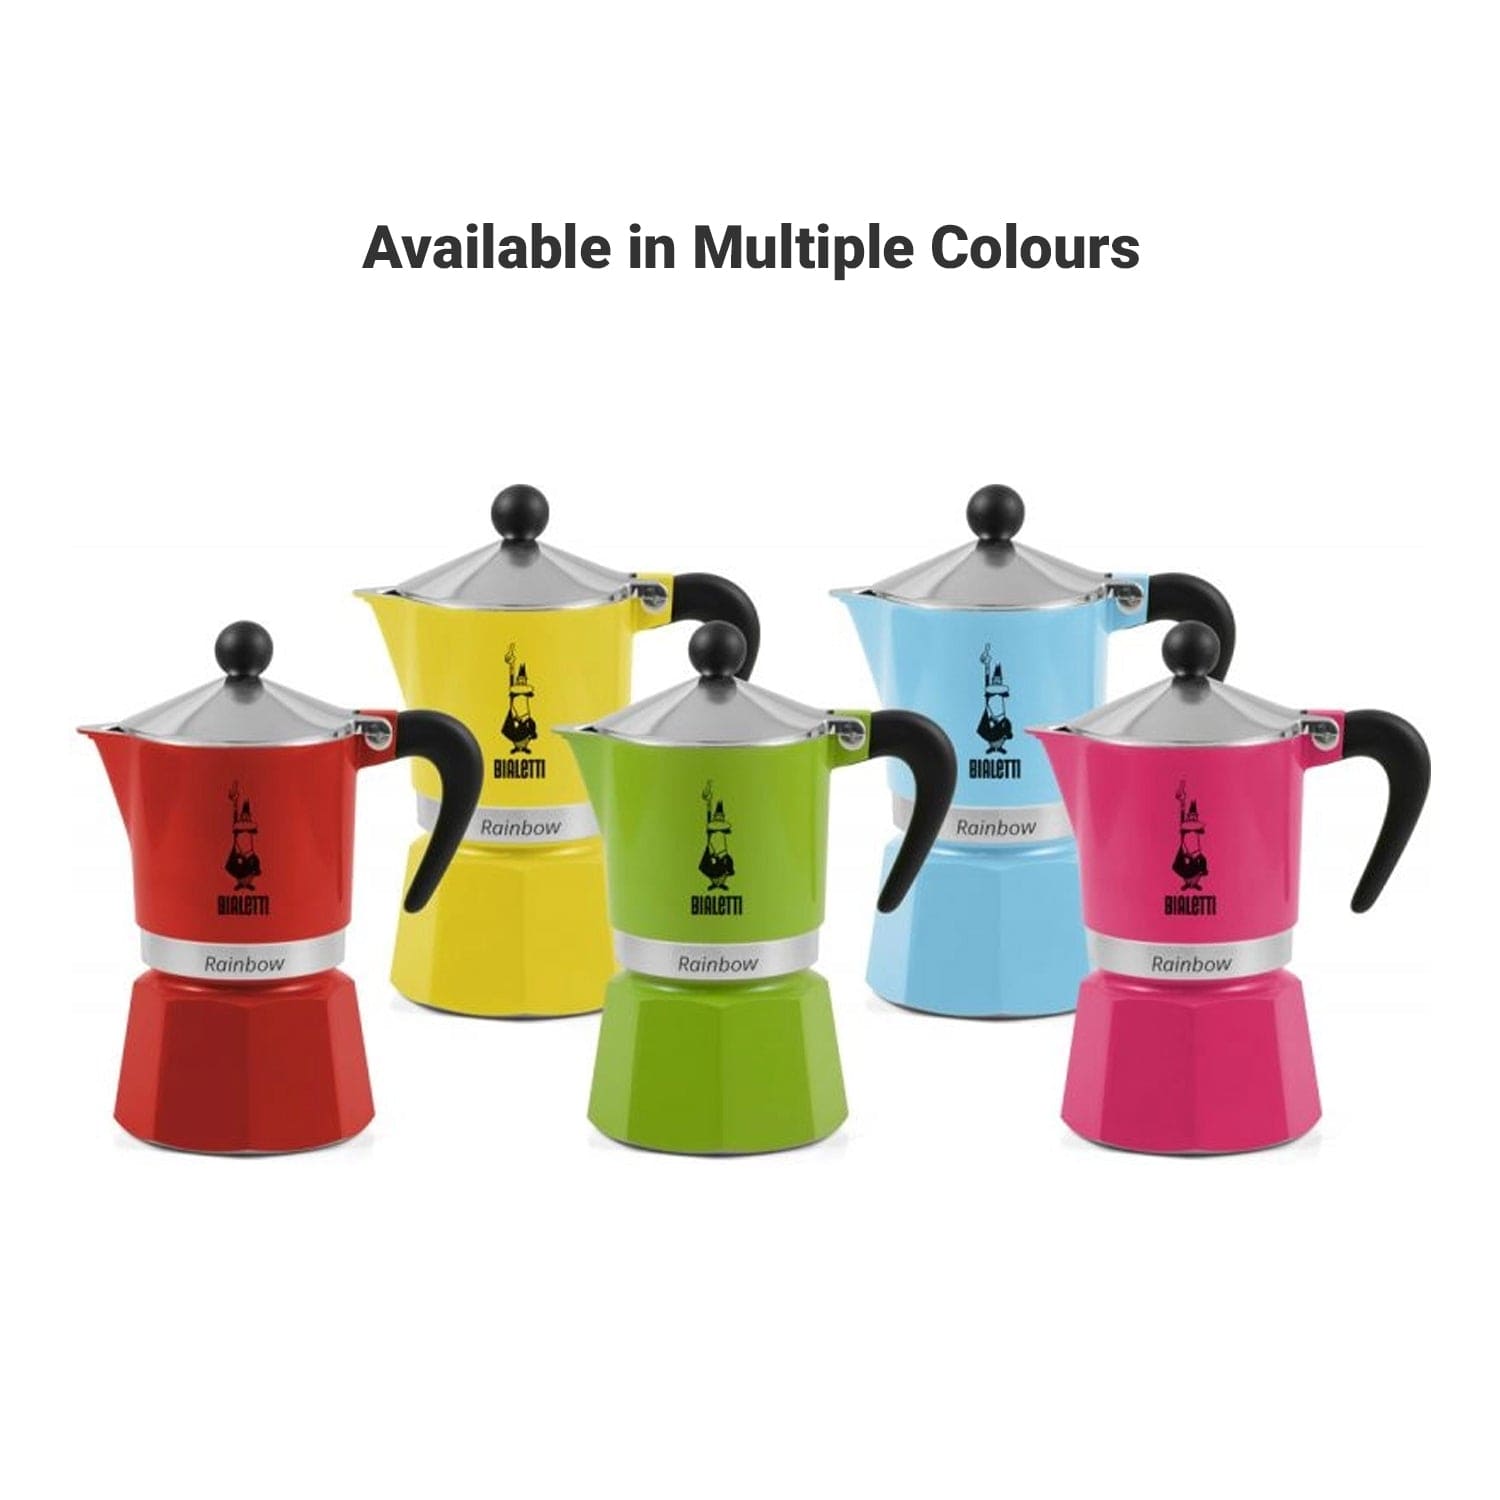 Bialetti Manual Brewing Bialetti Rainbow 3 Cups- Perfect Gift for Coffee Lovers